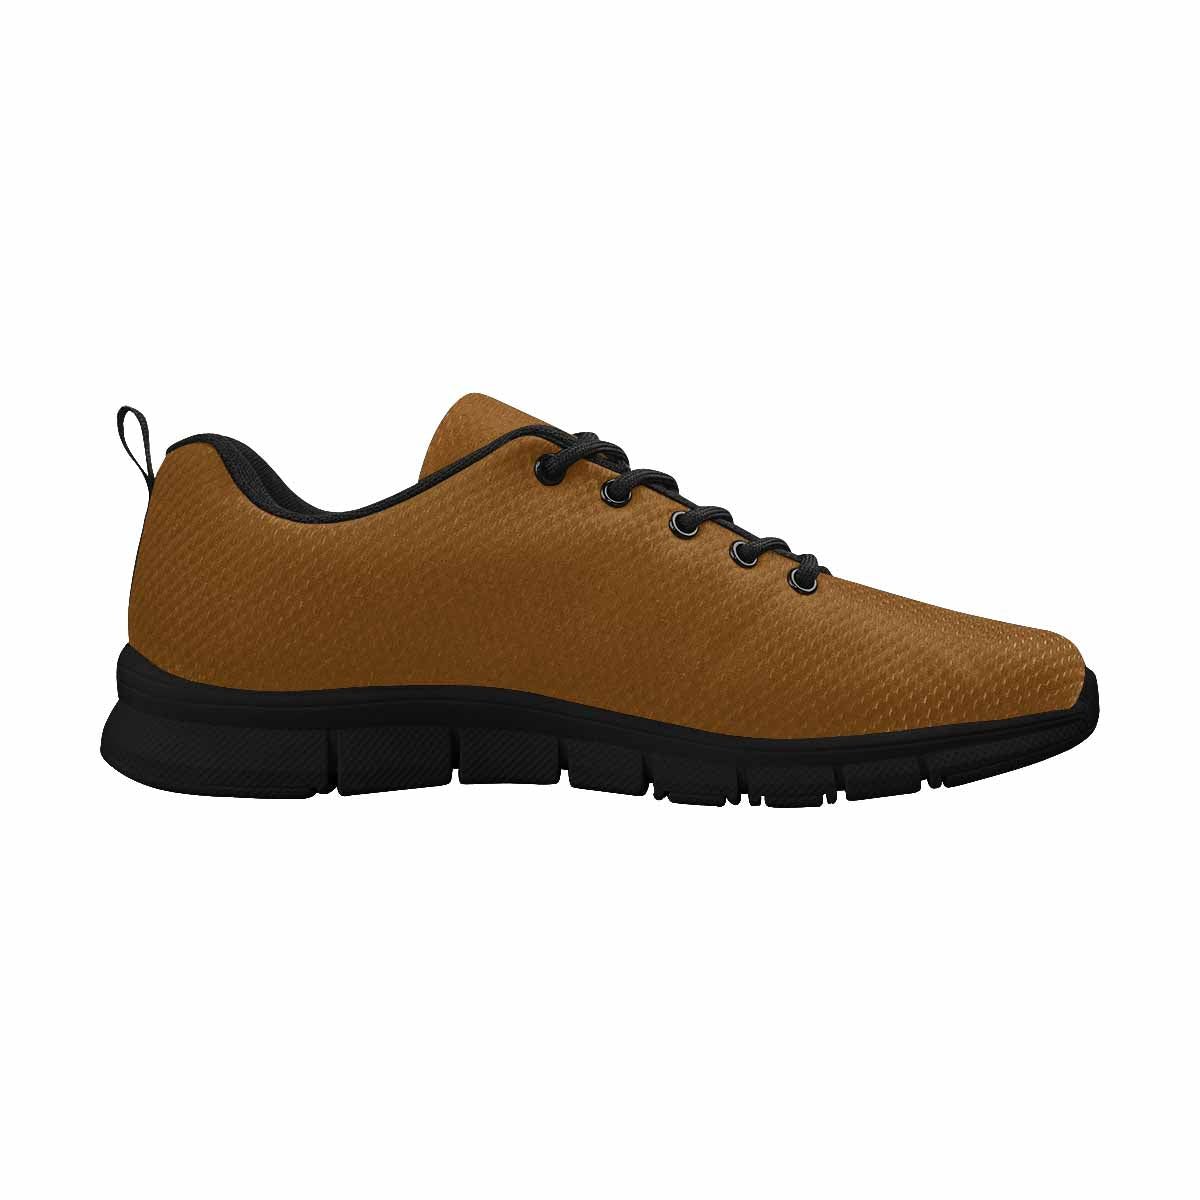 Uniquely You Sneakers for Men,    Chocolate Brown   - Running Shoes